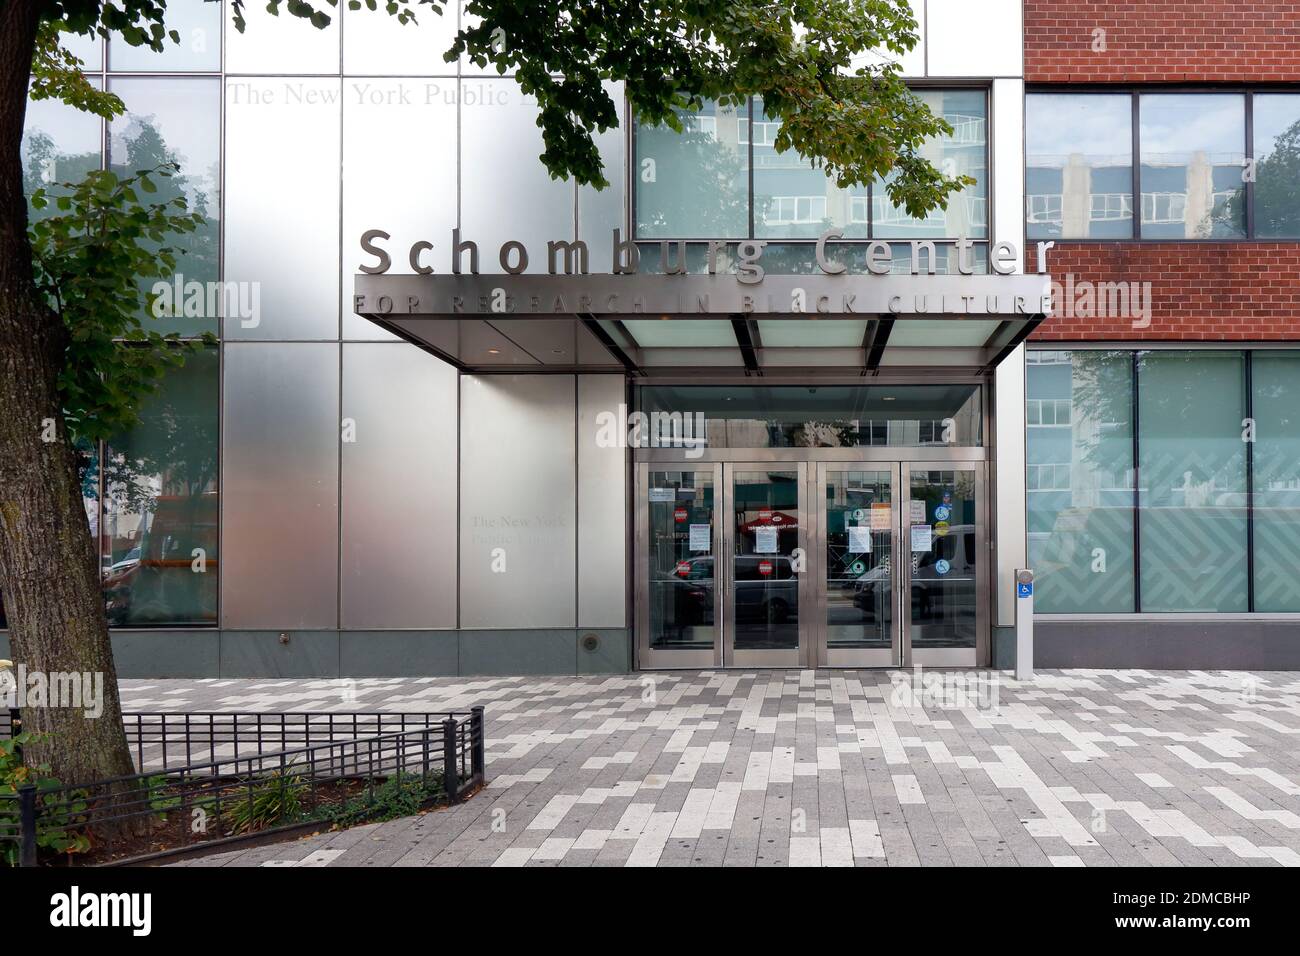 Schomburg Center for Research in Black Culture, New York Public Library, 515 Malcolm X Blvd, New York, NY. exterior storefront of a library in Harlem Stock Photo